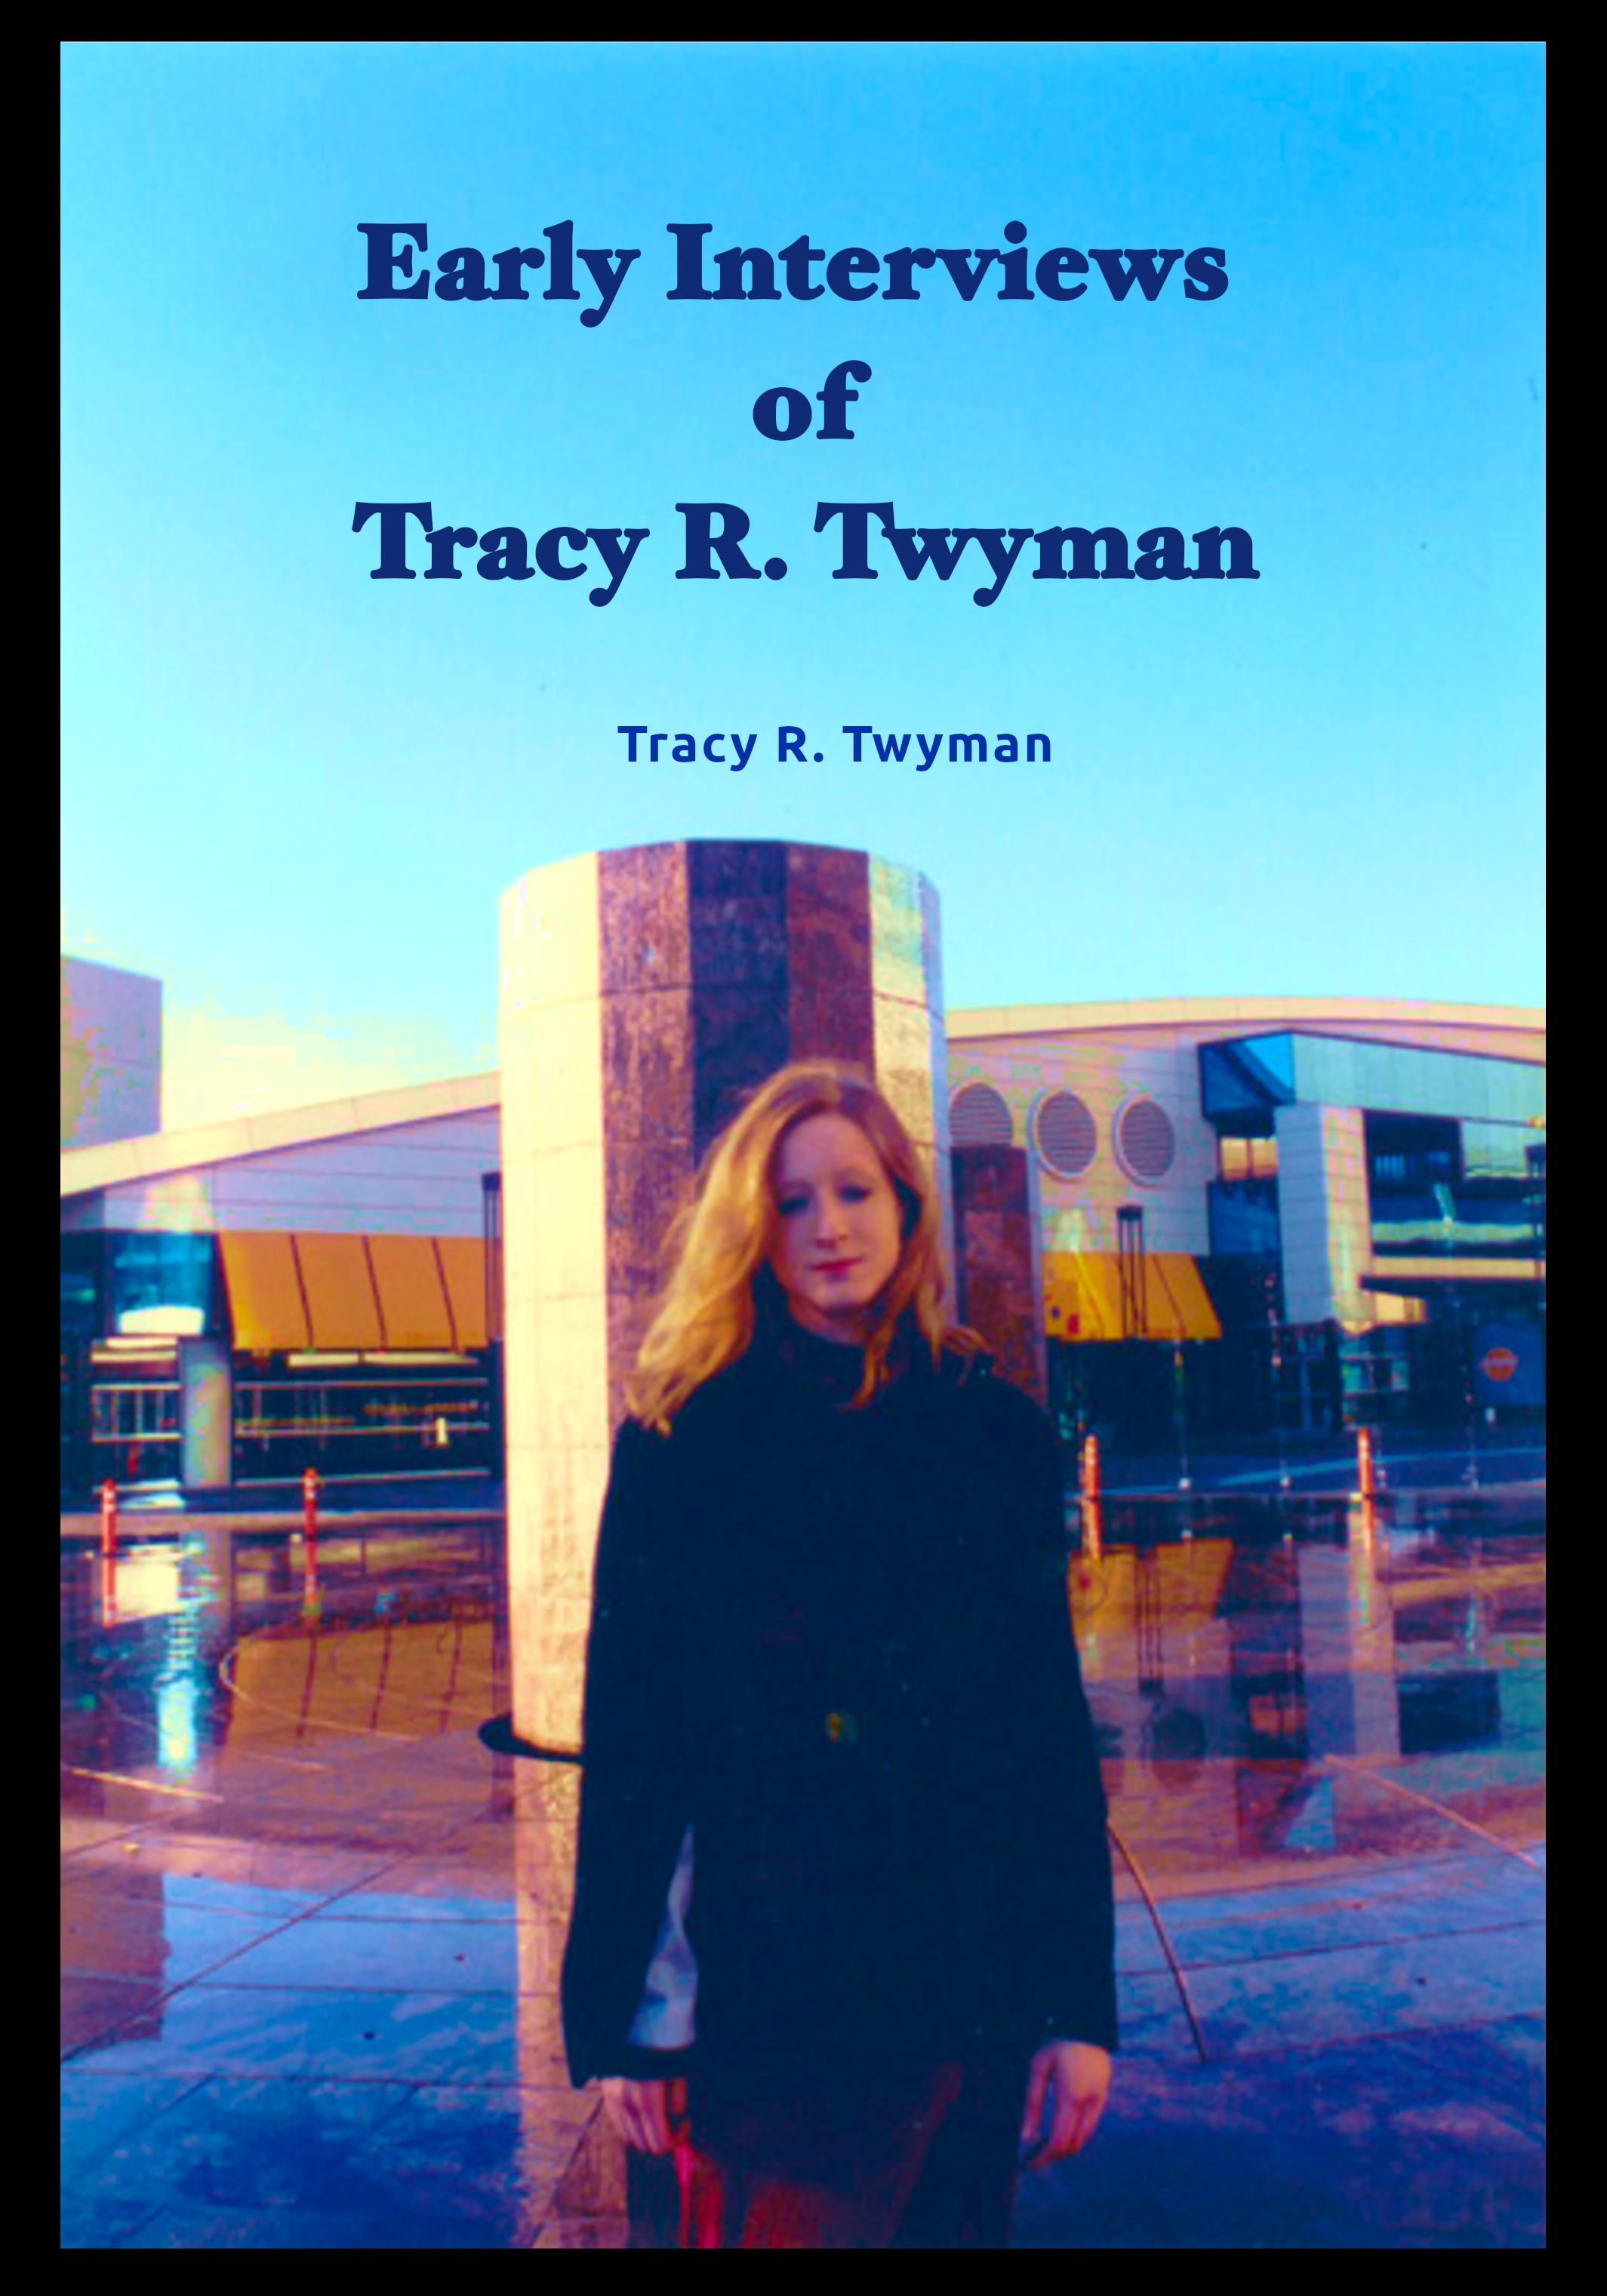 Book cover front:  Early Interviews of Tracy R. Twyman